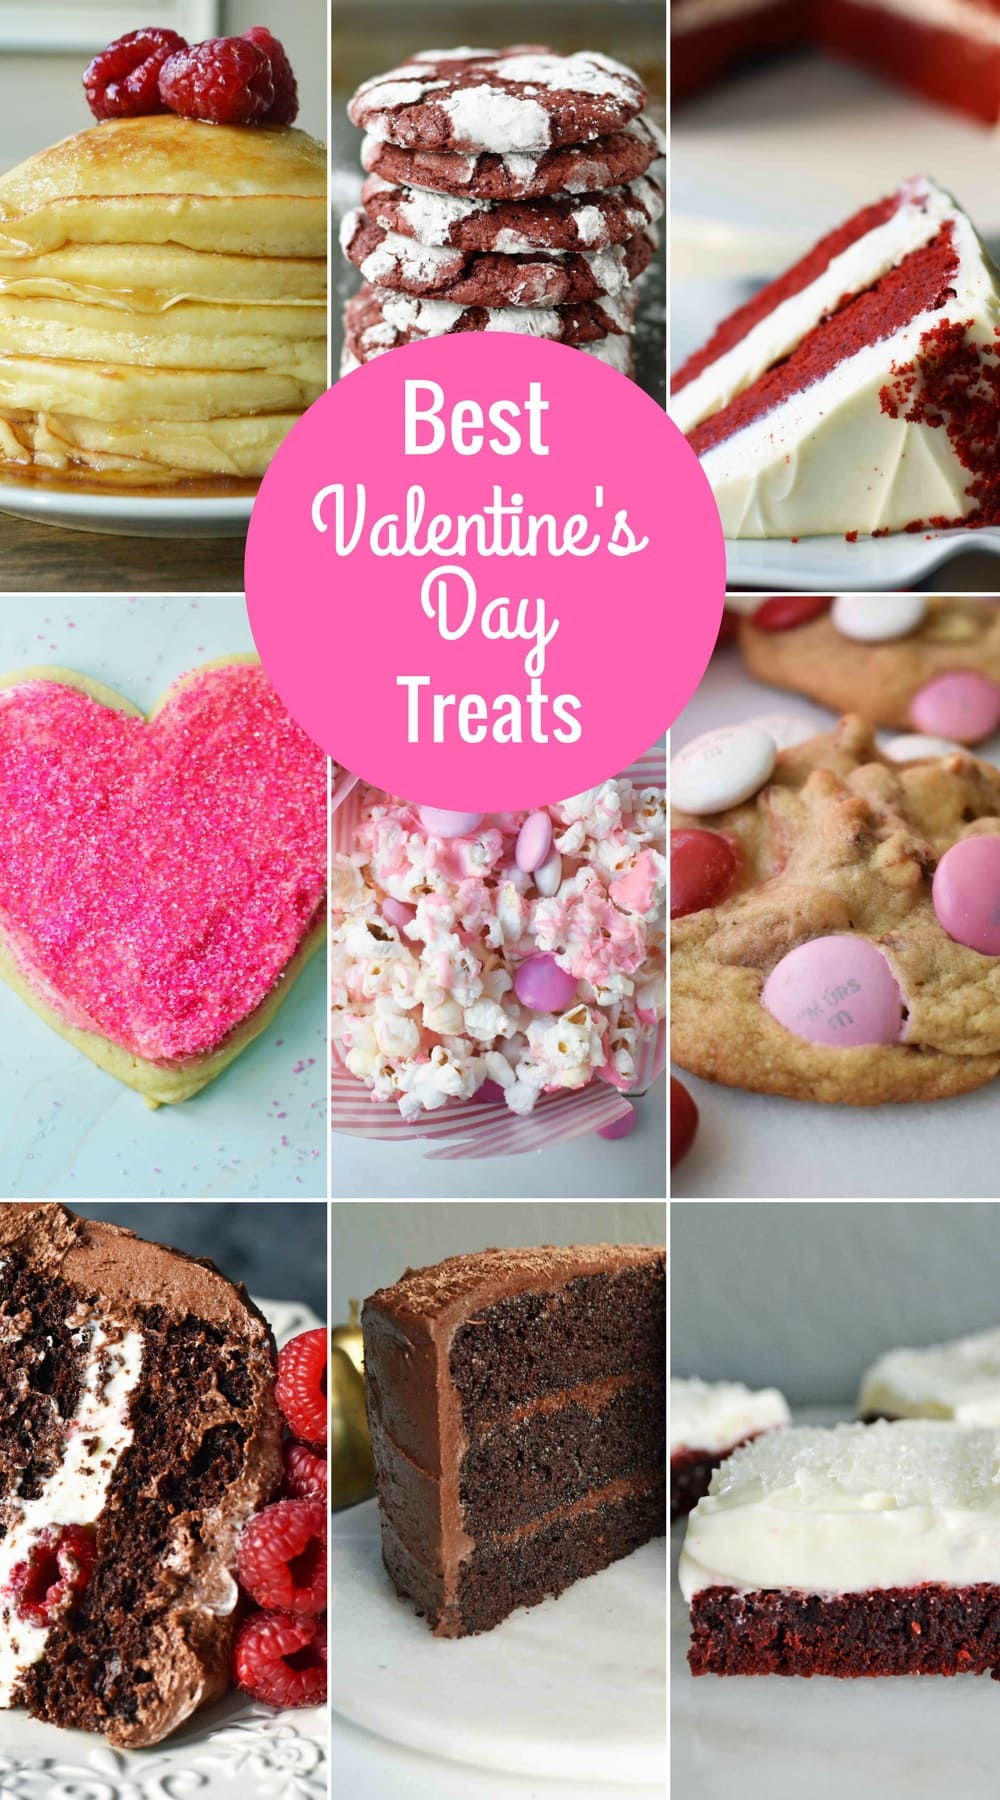 Best Valentine's Day Treats, Desserts, Snacks, and Traditions. How to make Valentine's Day special for kids, how to make valentine's day special, best valentine's day desserts.